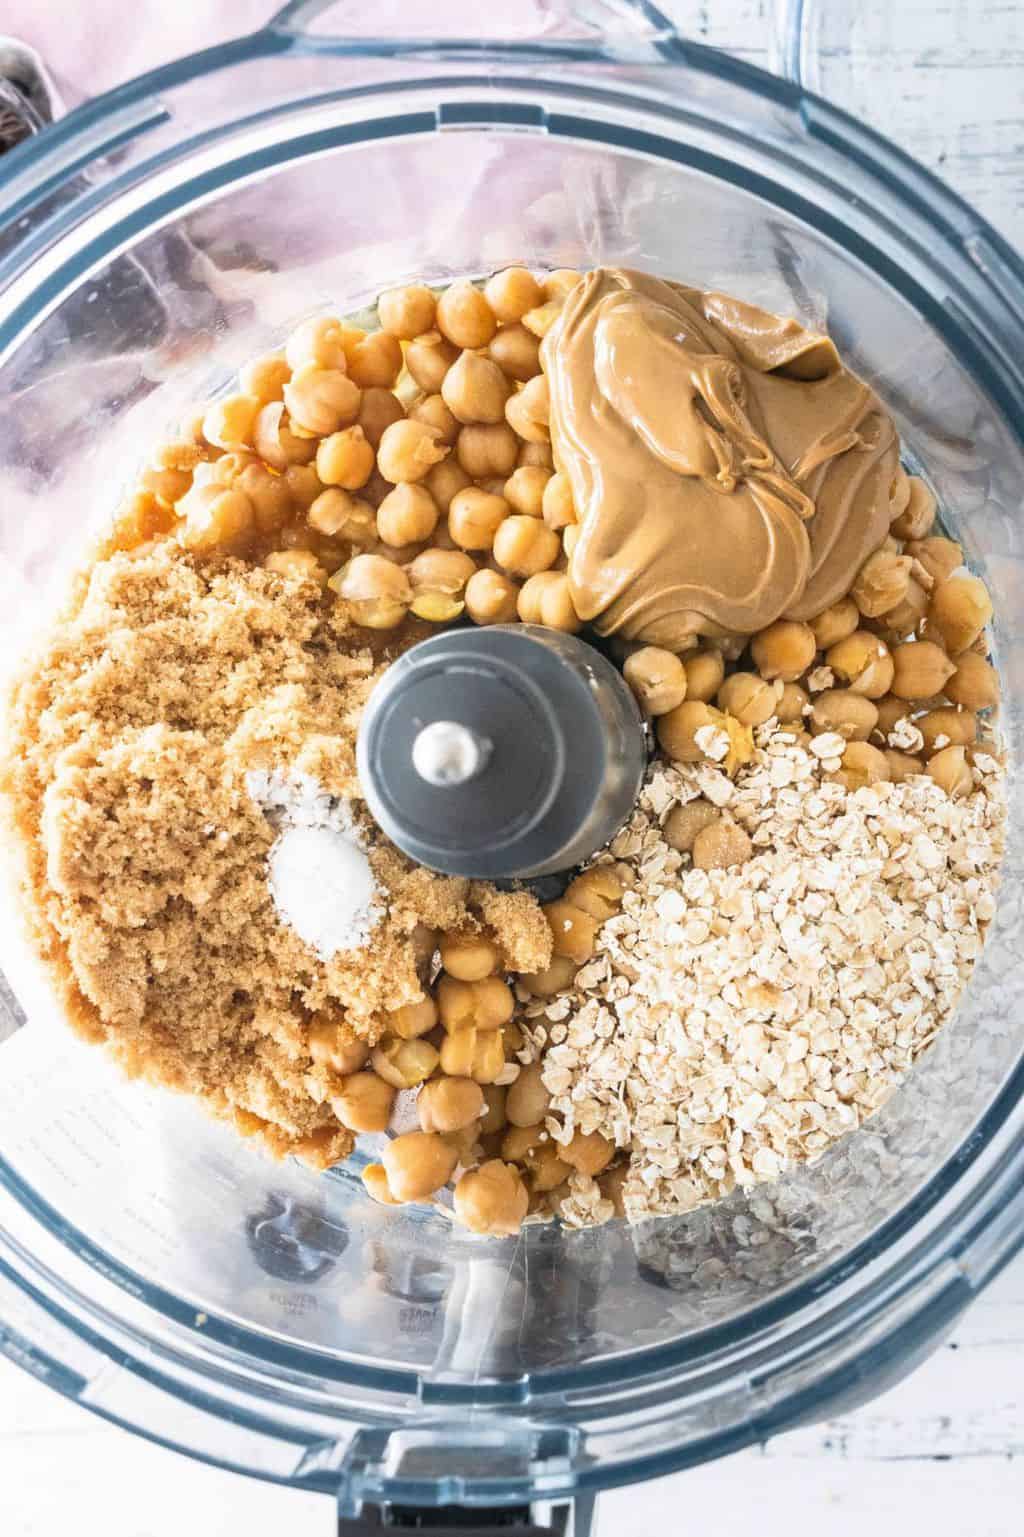 Chickpeas, nut butter, sweetener, salt, baking powder, and oats, and vanilla extract in the bowl of a food processor for the Chickpea Cookie Dough